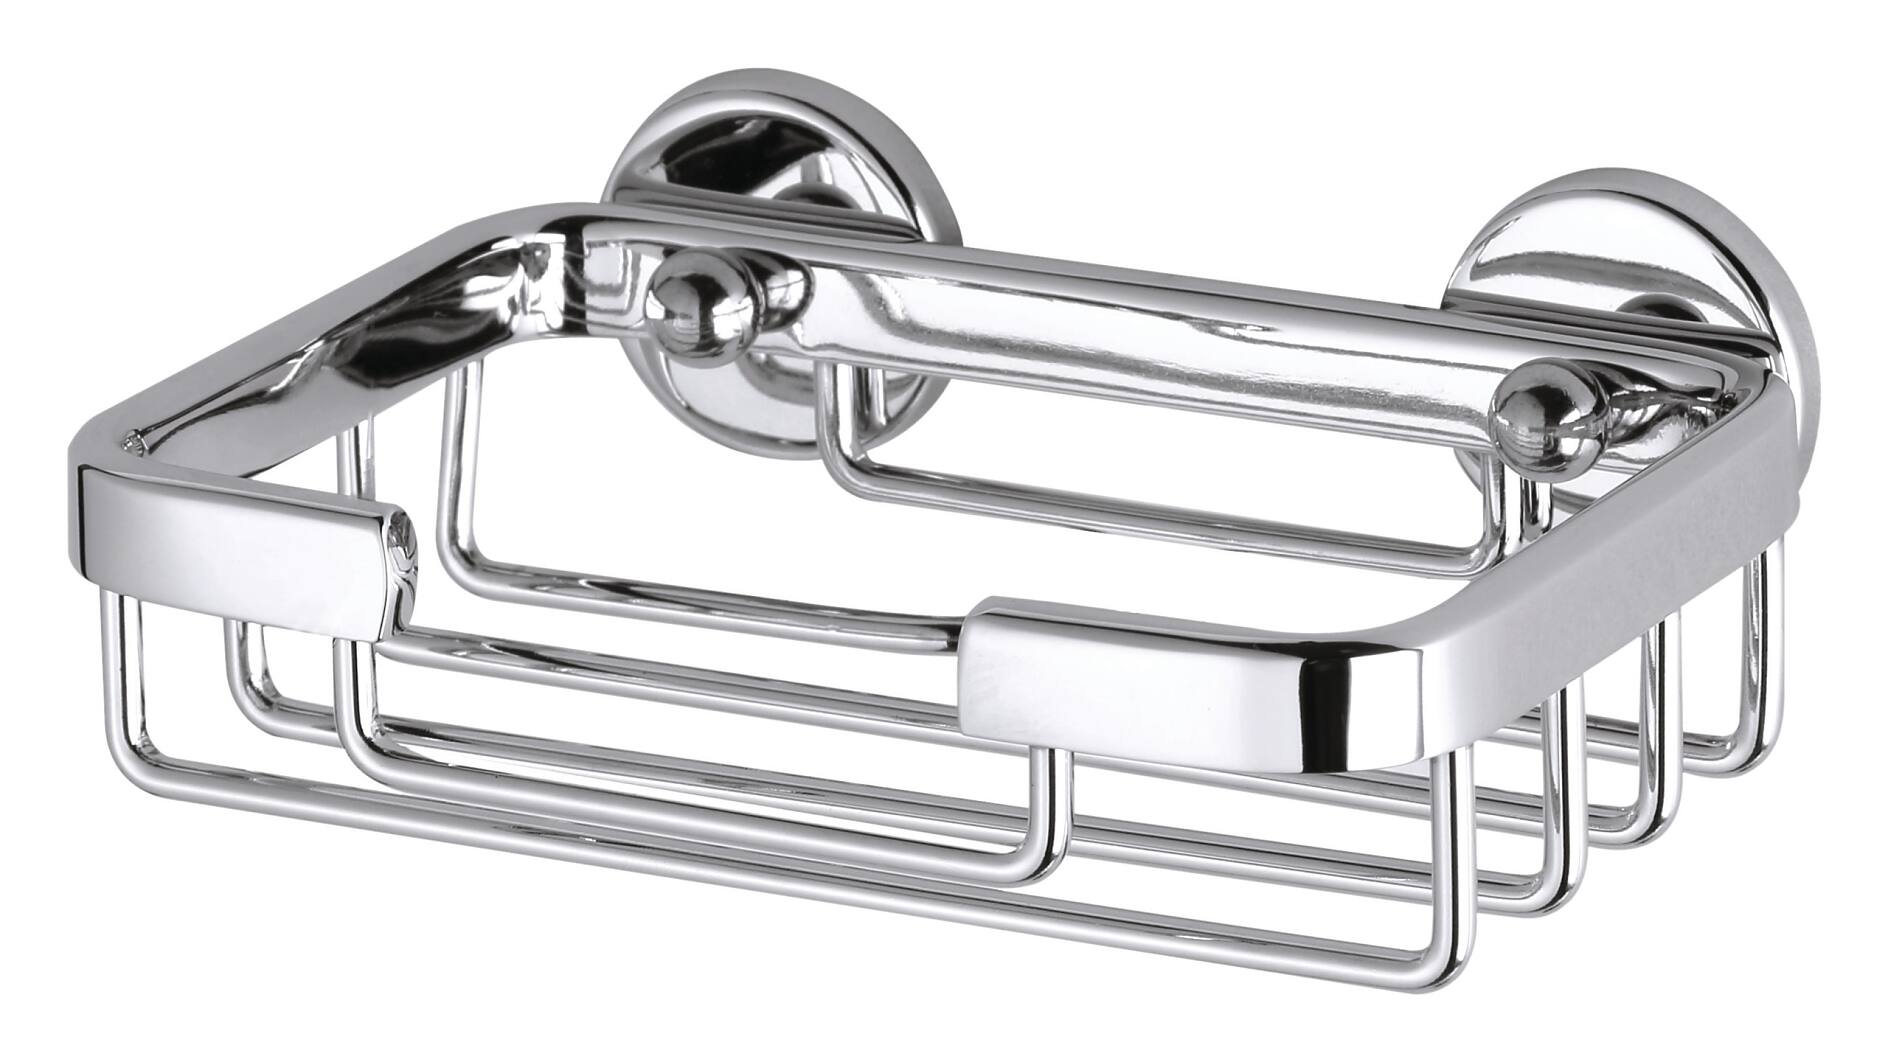 Premium solid brass, chrome shower caddy - soap dish with the nie